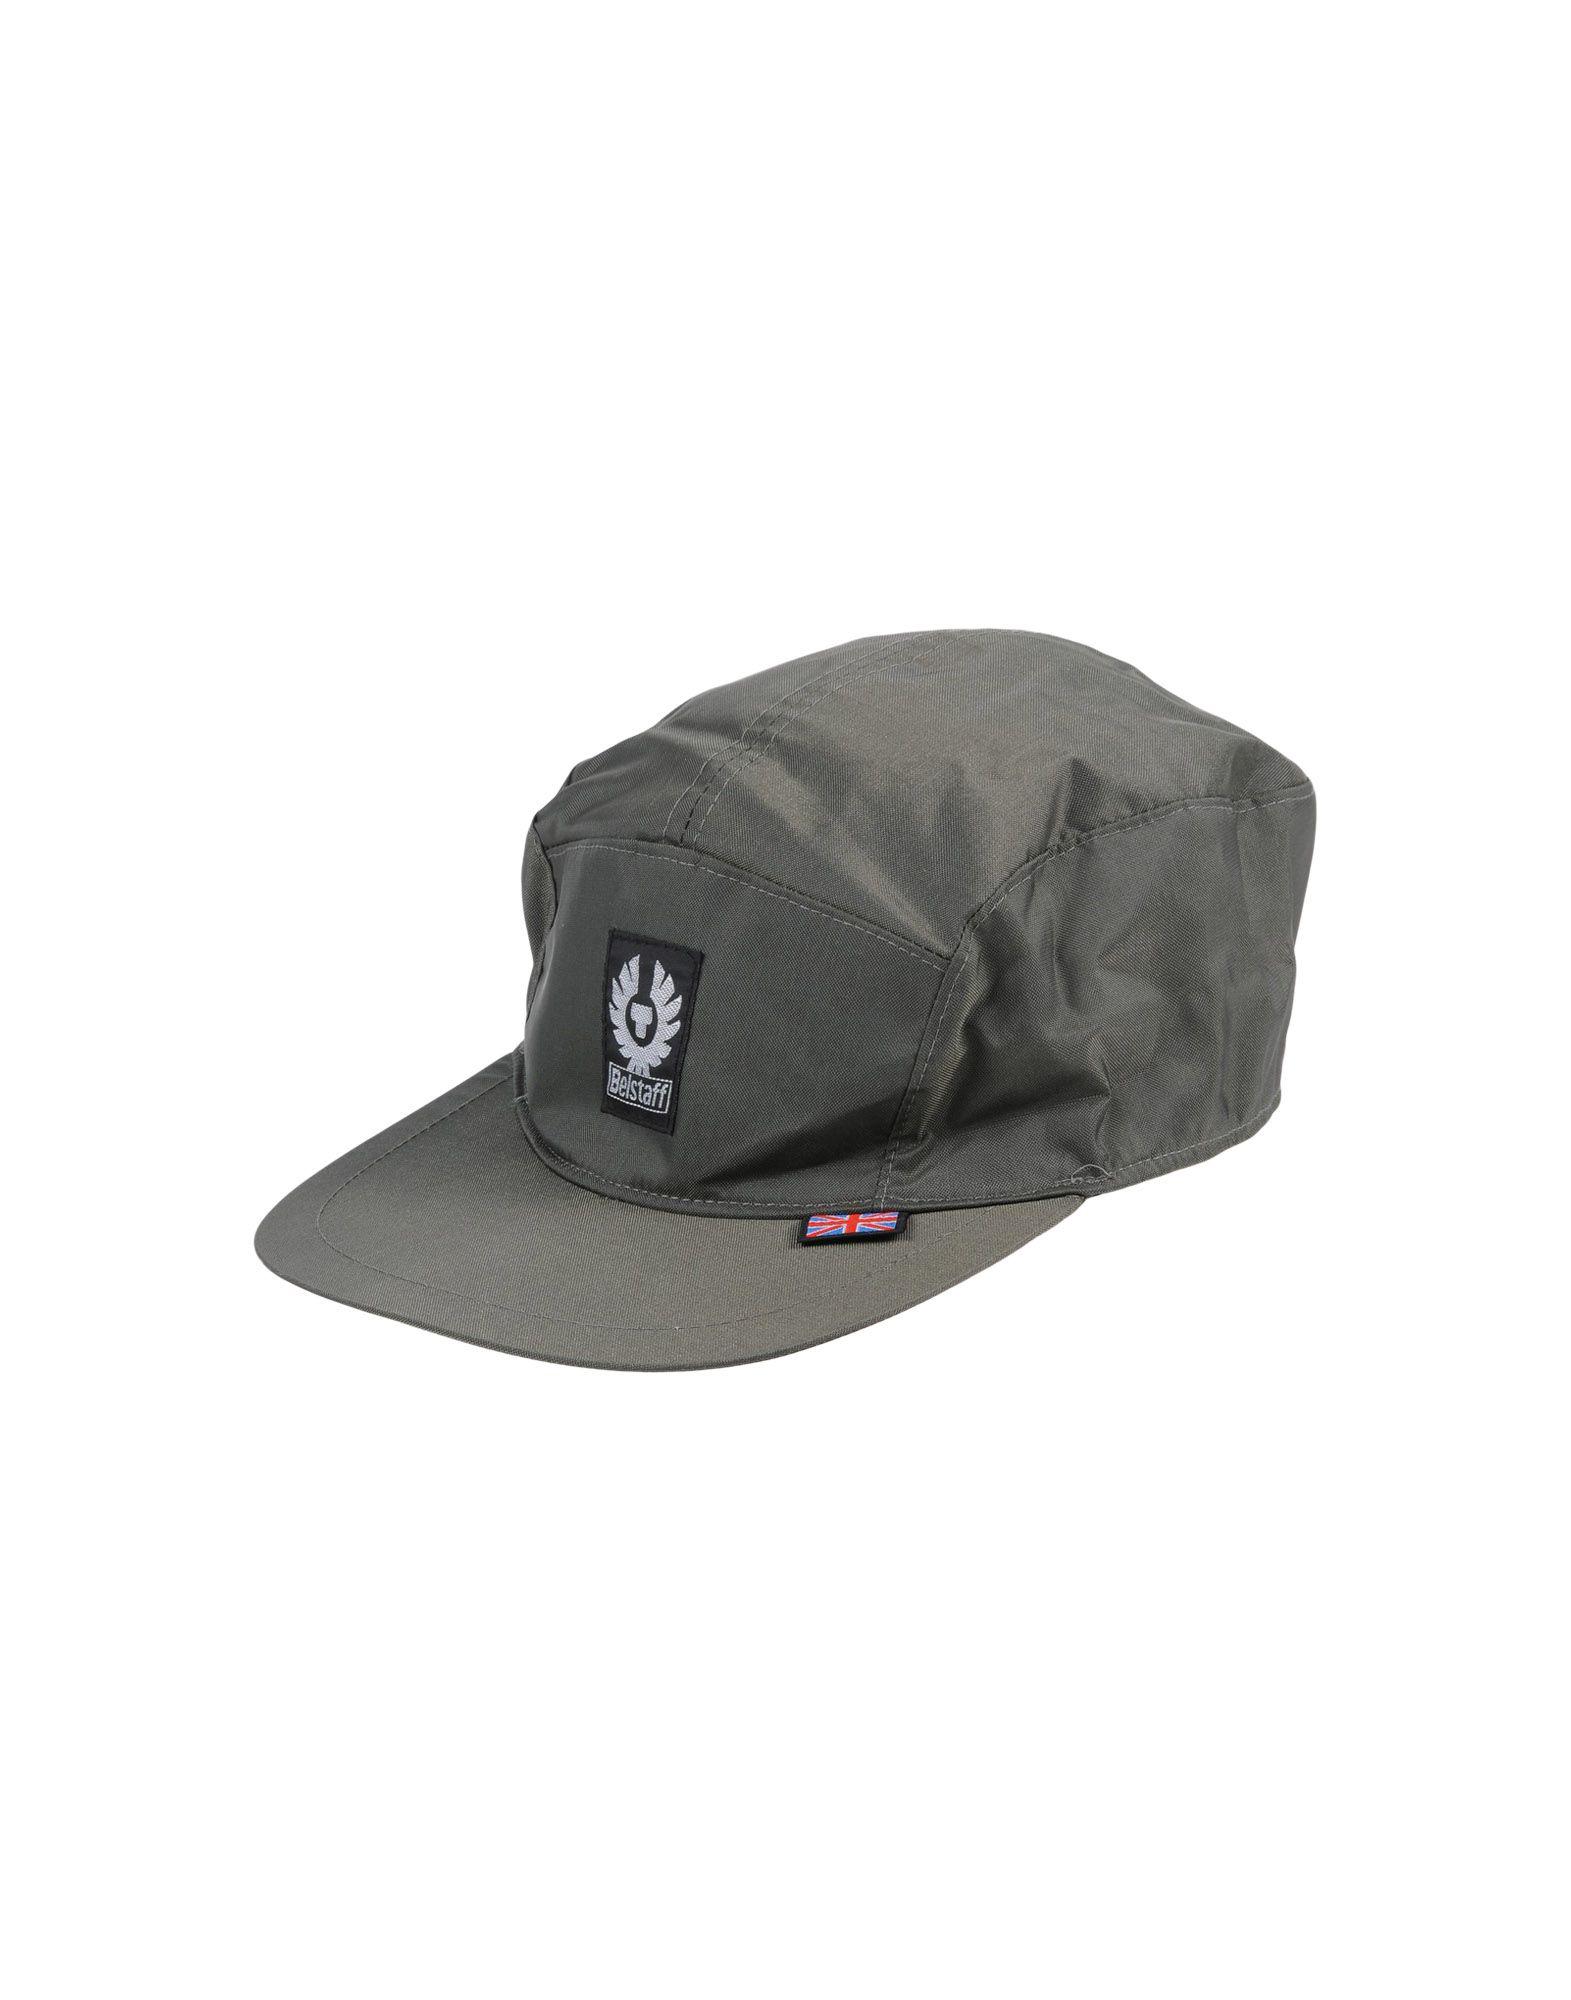 Belstaff Synthetic Hat in Military Green (Green) for Men - Lyst